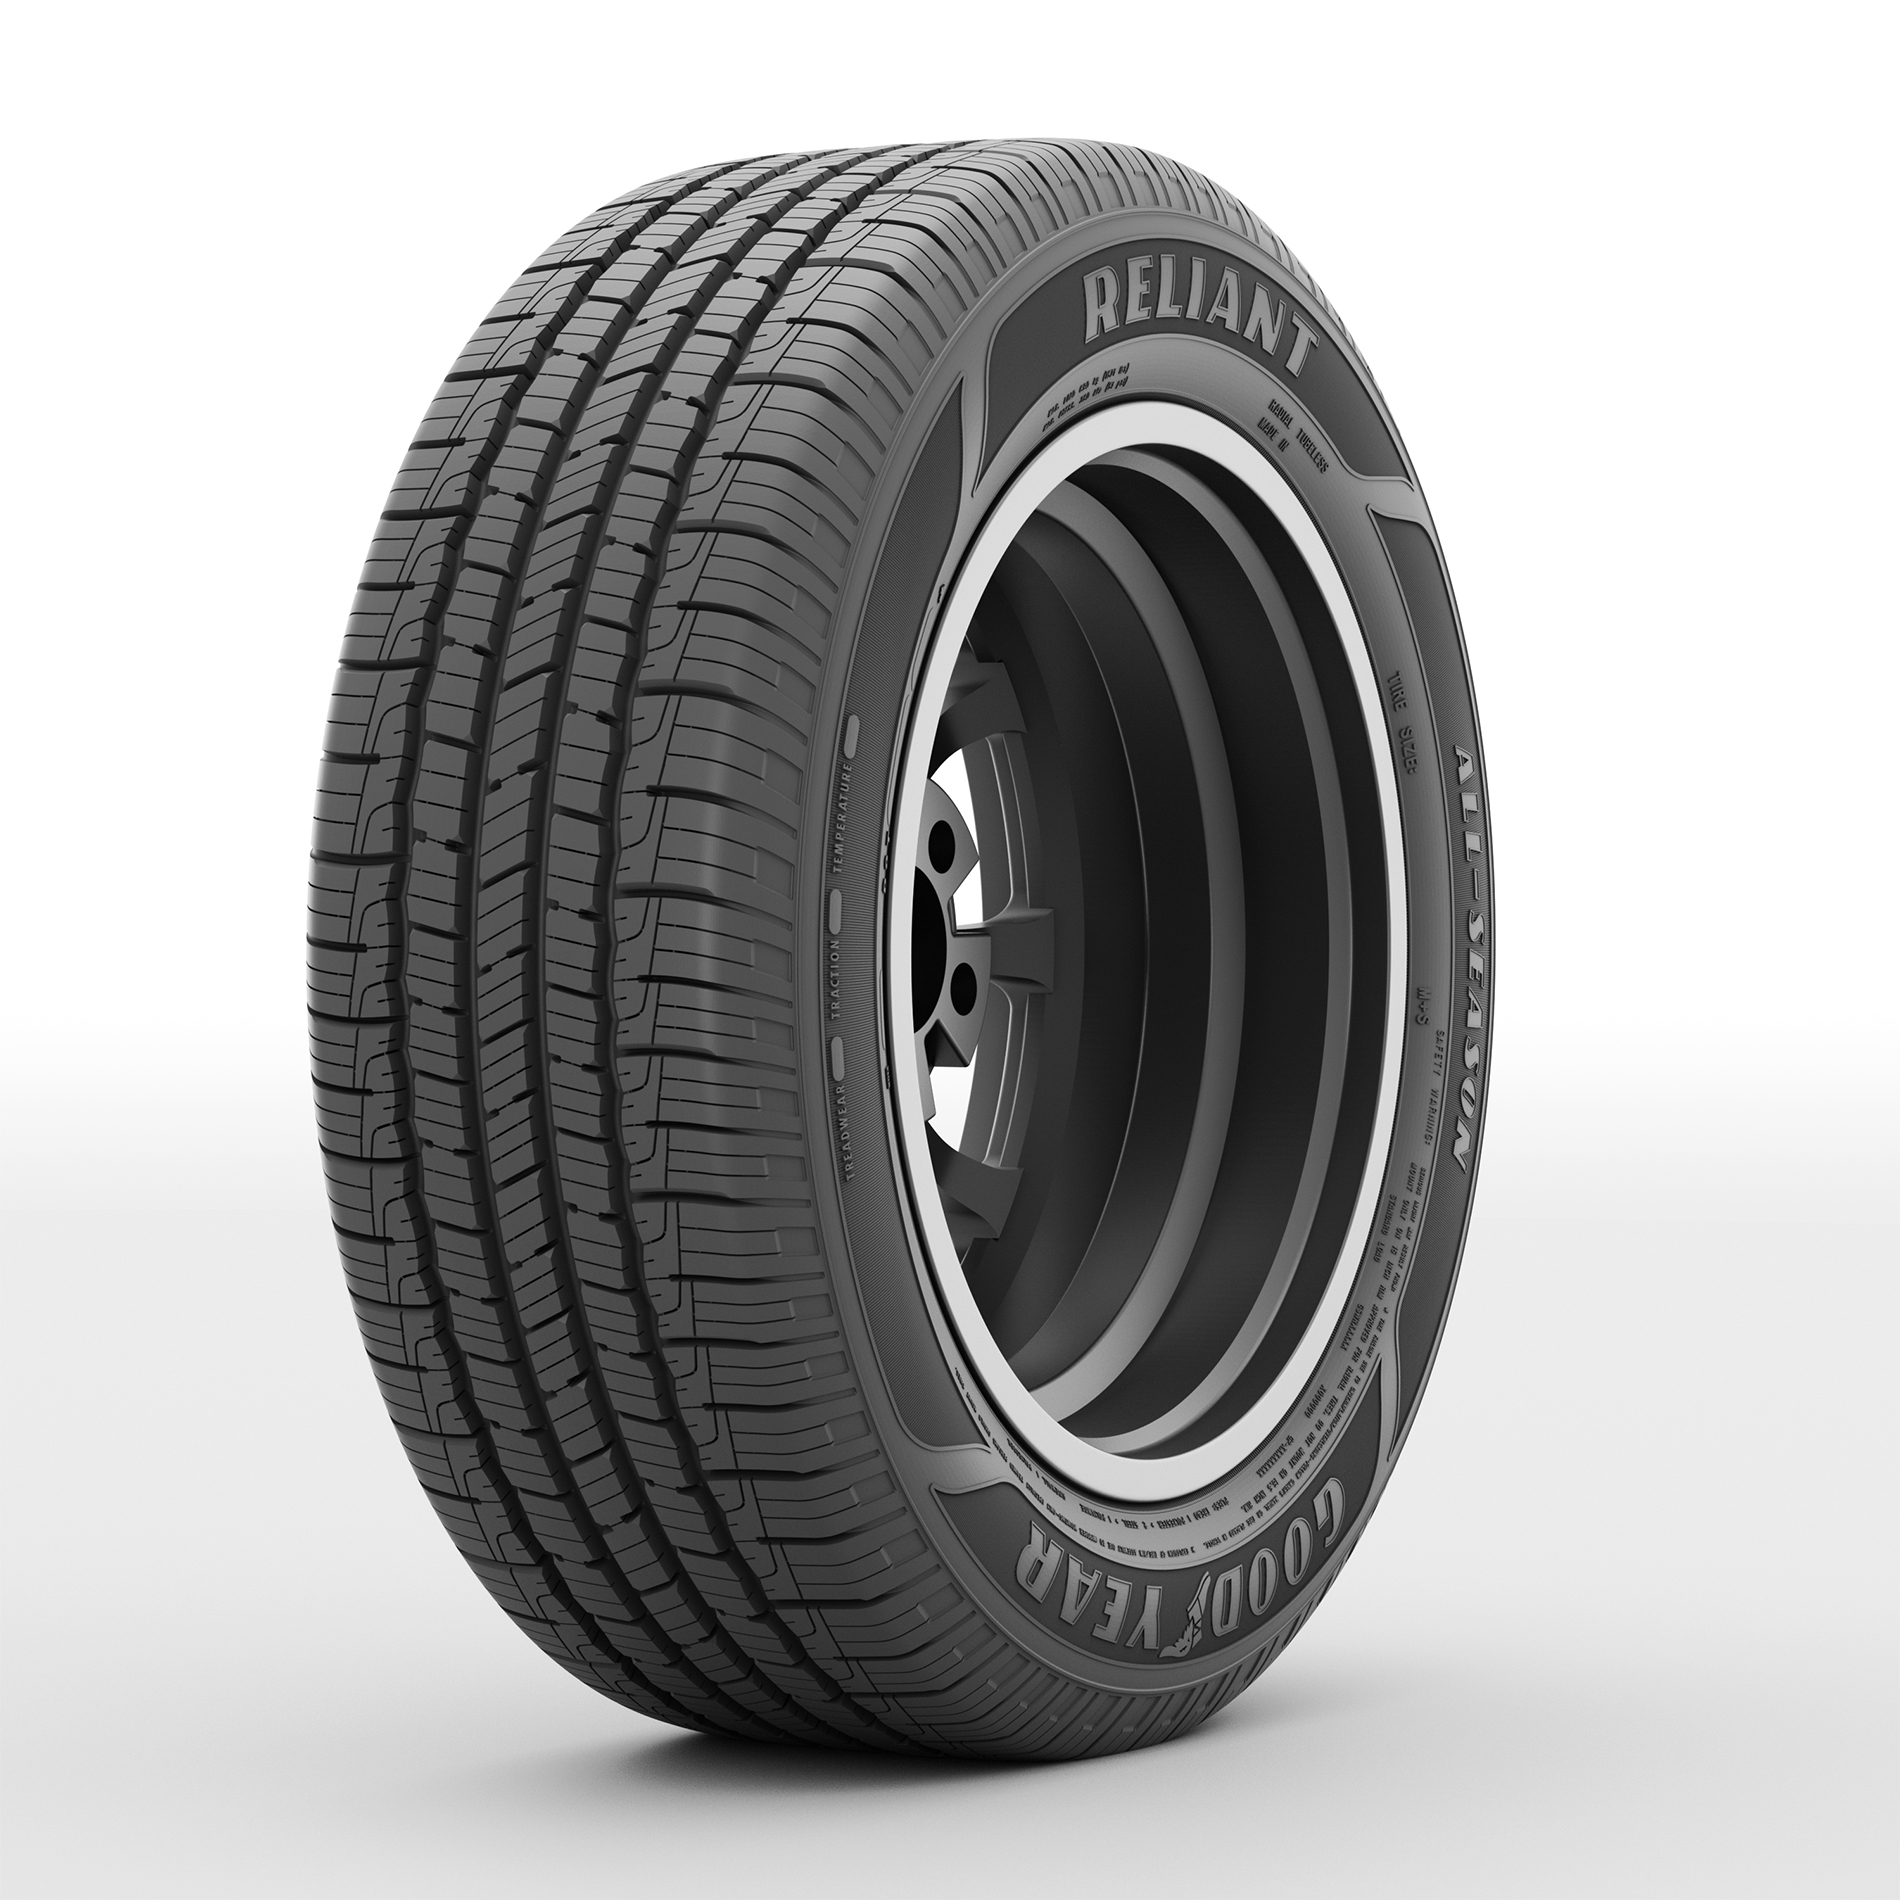 Find 205/50R17 Tires  Discount Tire Direct